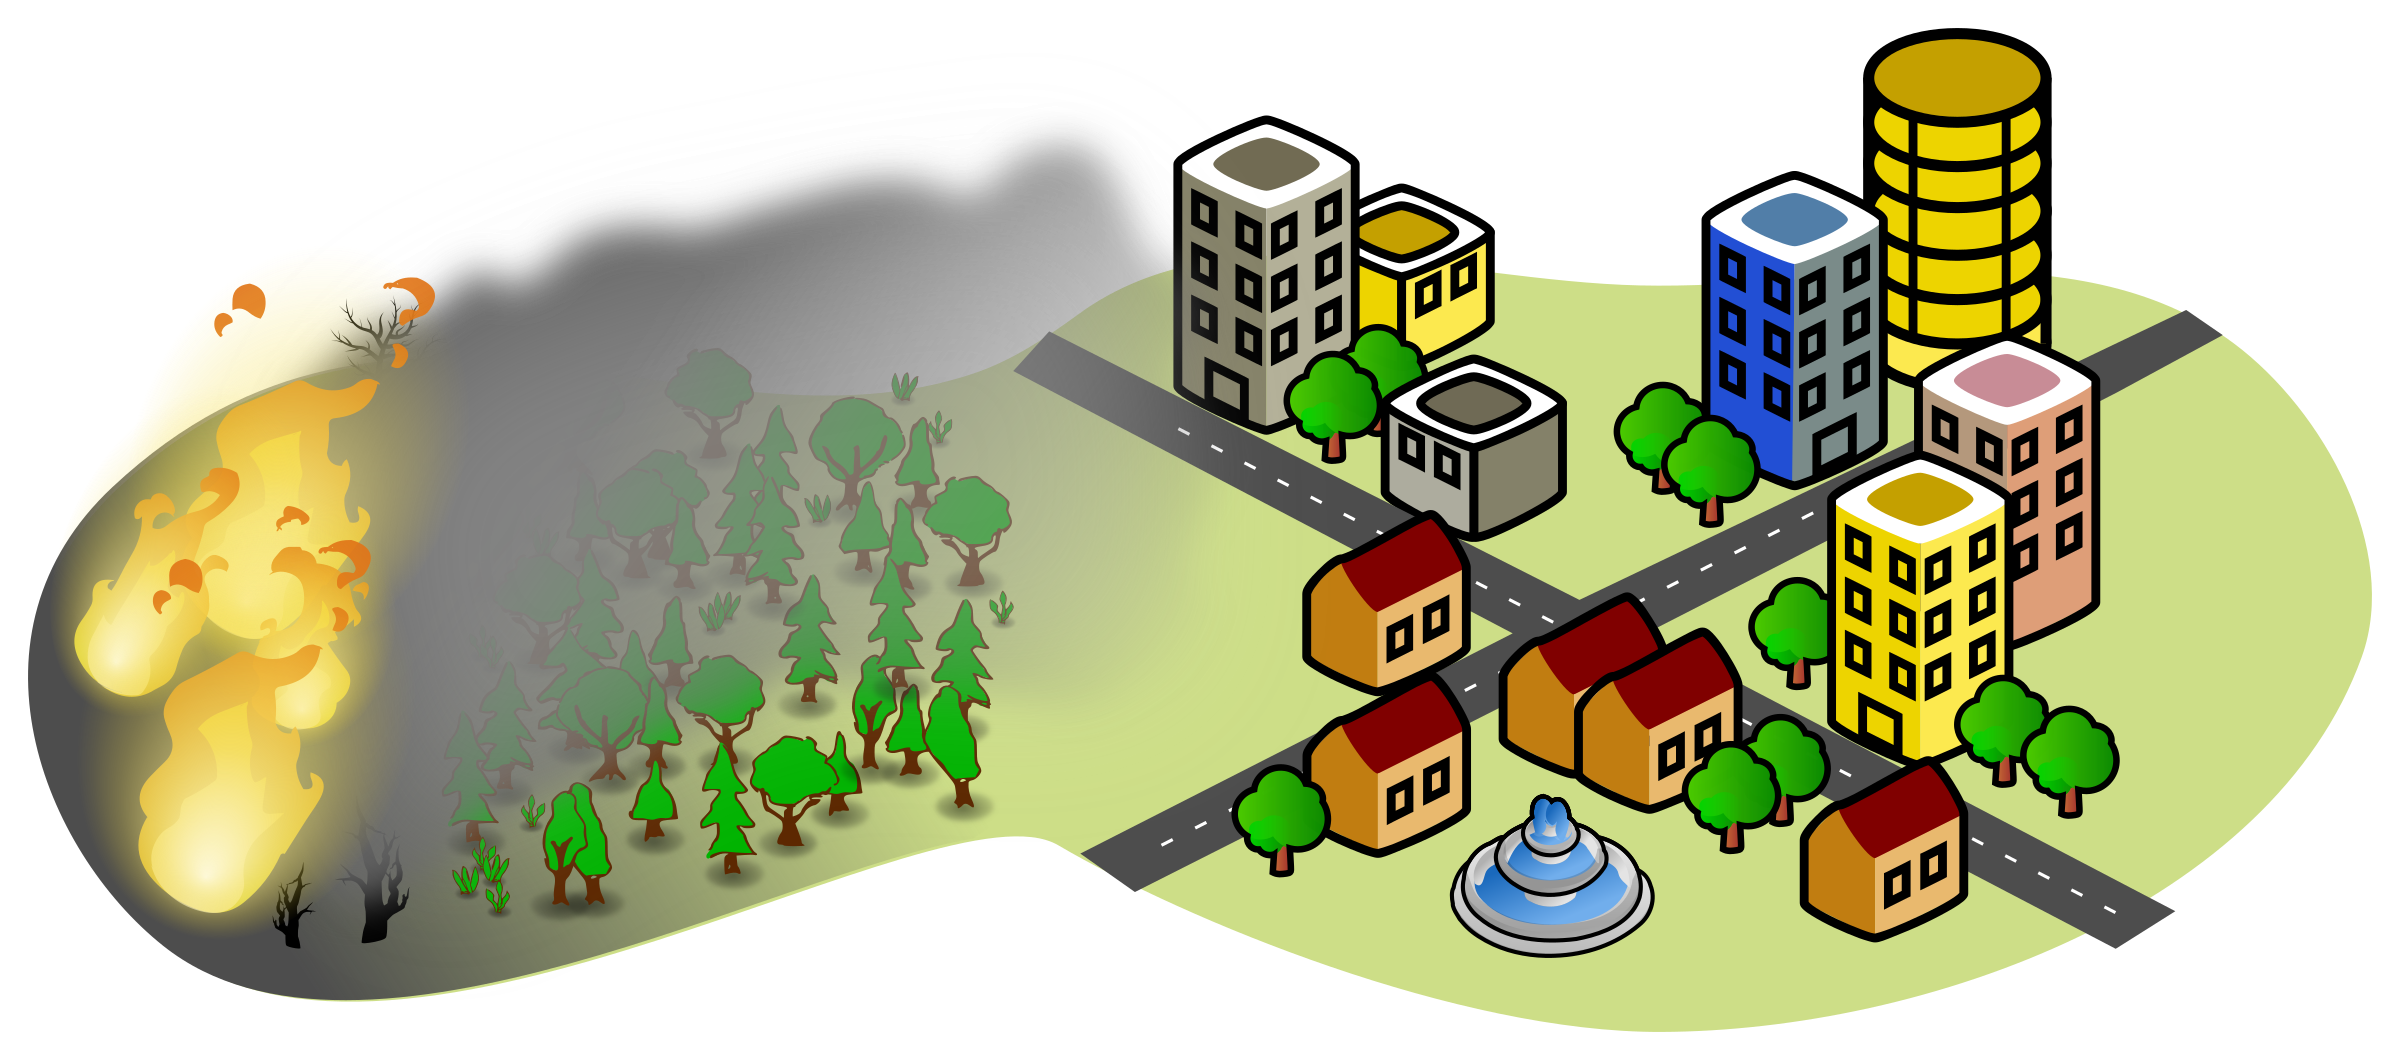 Forest endangering the big. Earthquake clipart city on fire